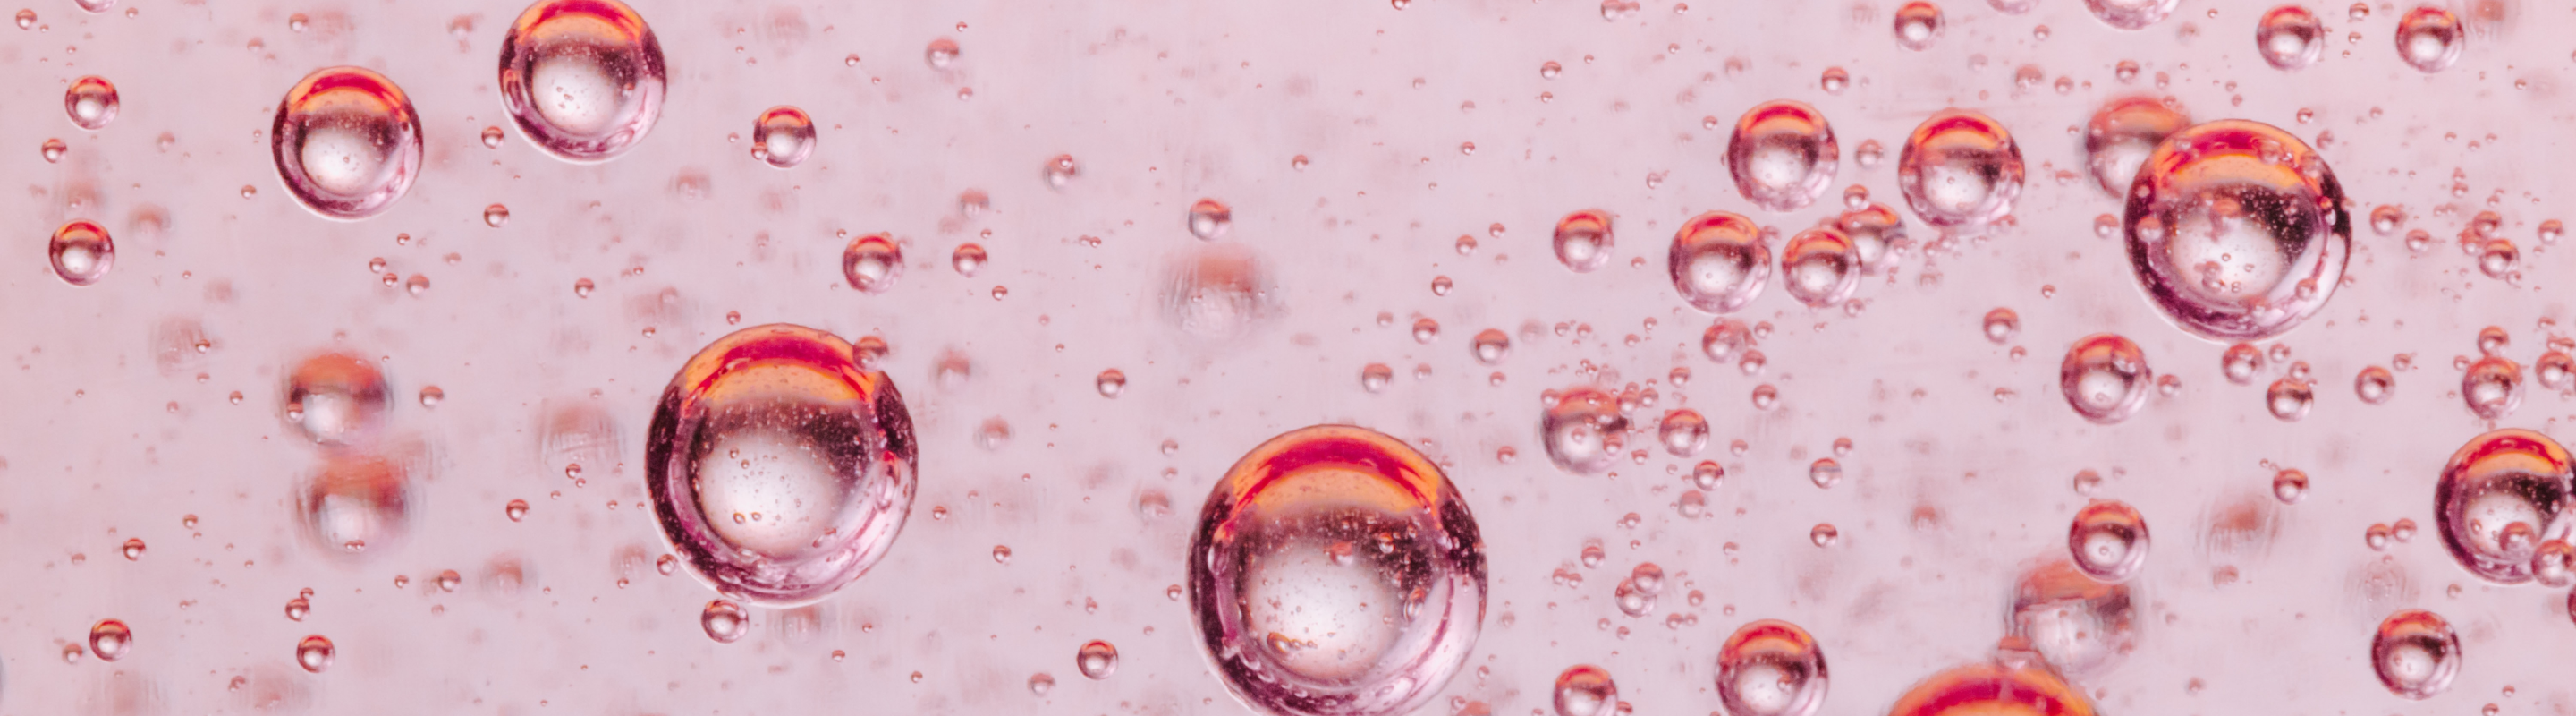 photograph of bubbles in rose colored liquid